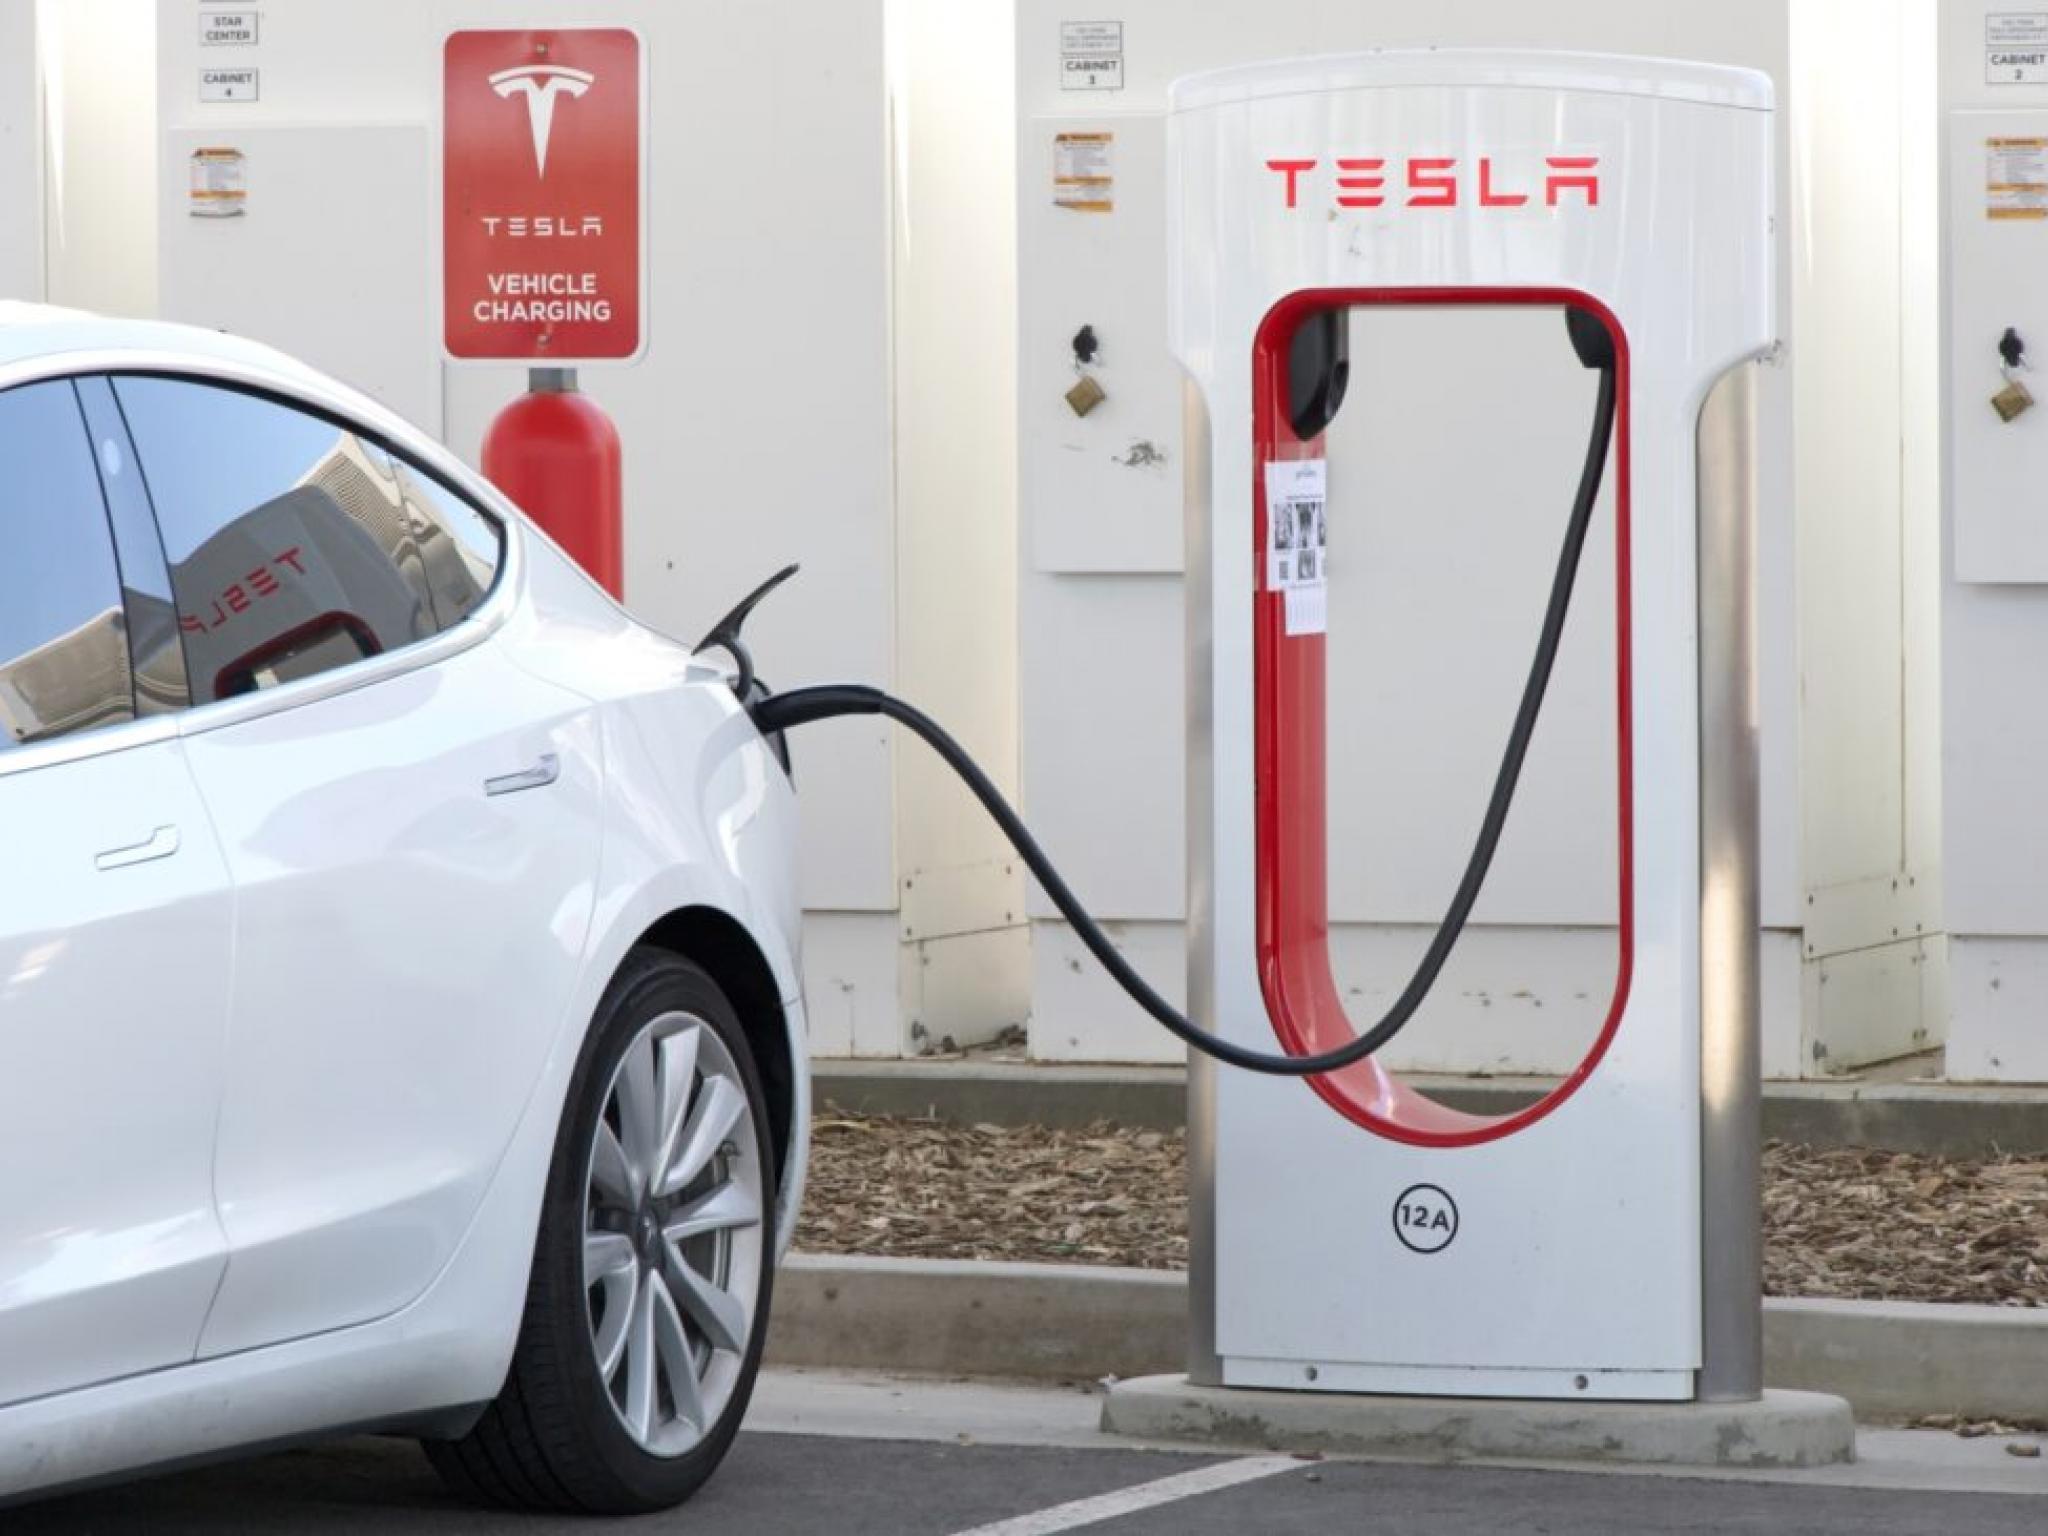  elon-musk-vows-to-investigate-teslas-lawsuit-against-evject-in-response-to-female-drivers-safety-concerns-at-charging-stations 